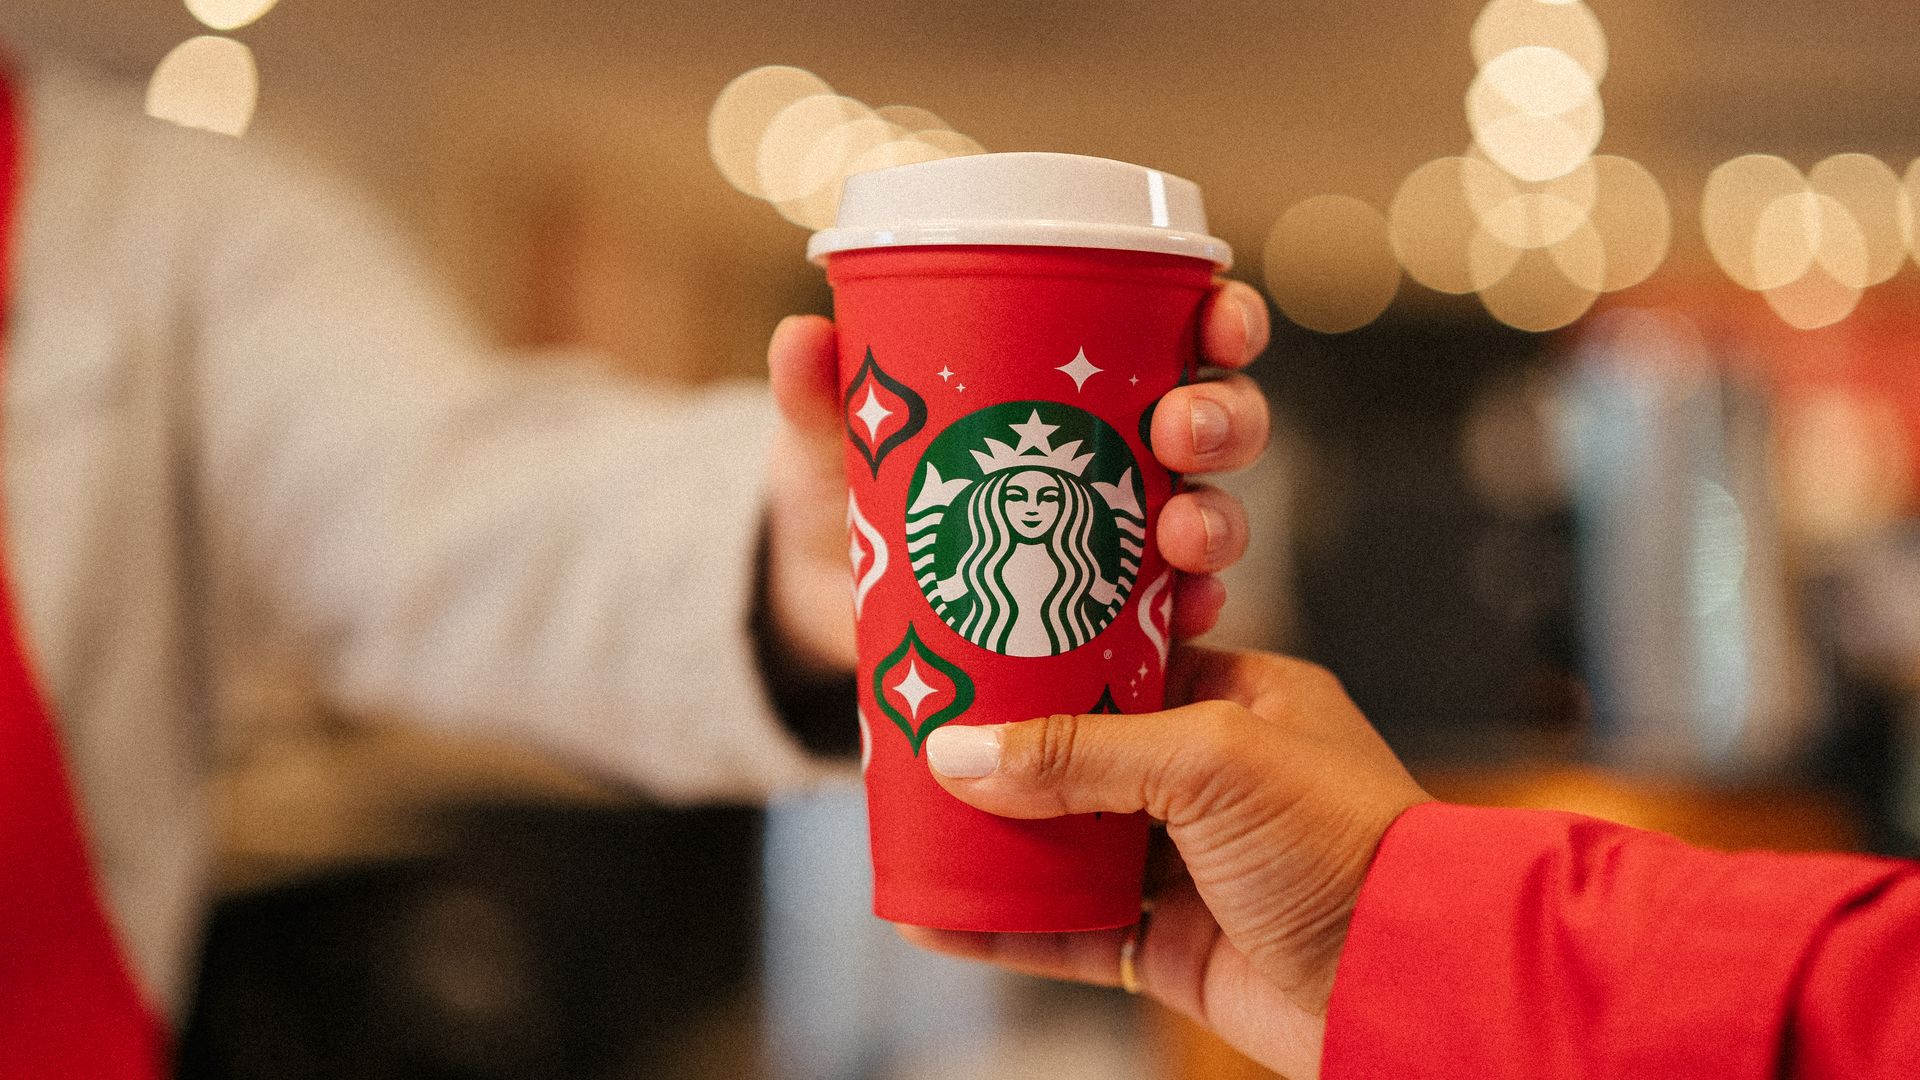 Starbucks Red Cup Day 2022: Get free reusable cup with holiday drinks  Thursday